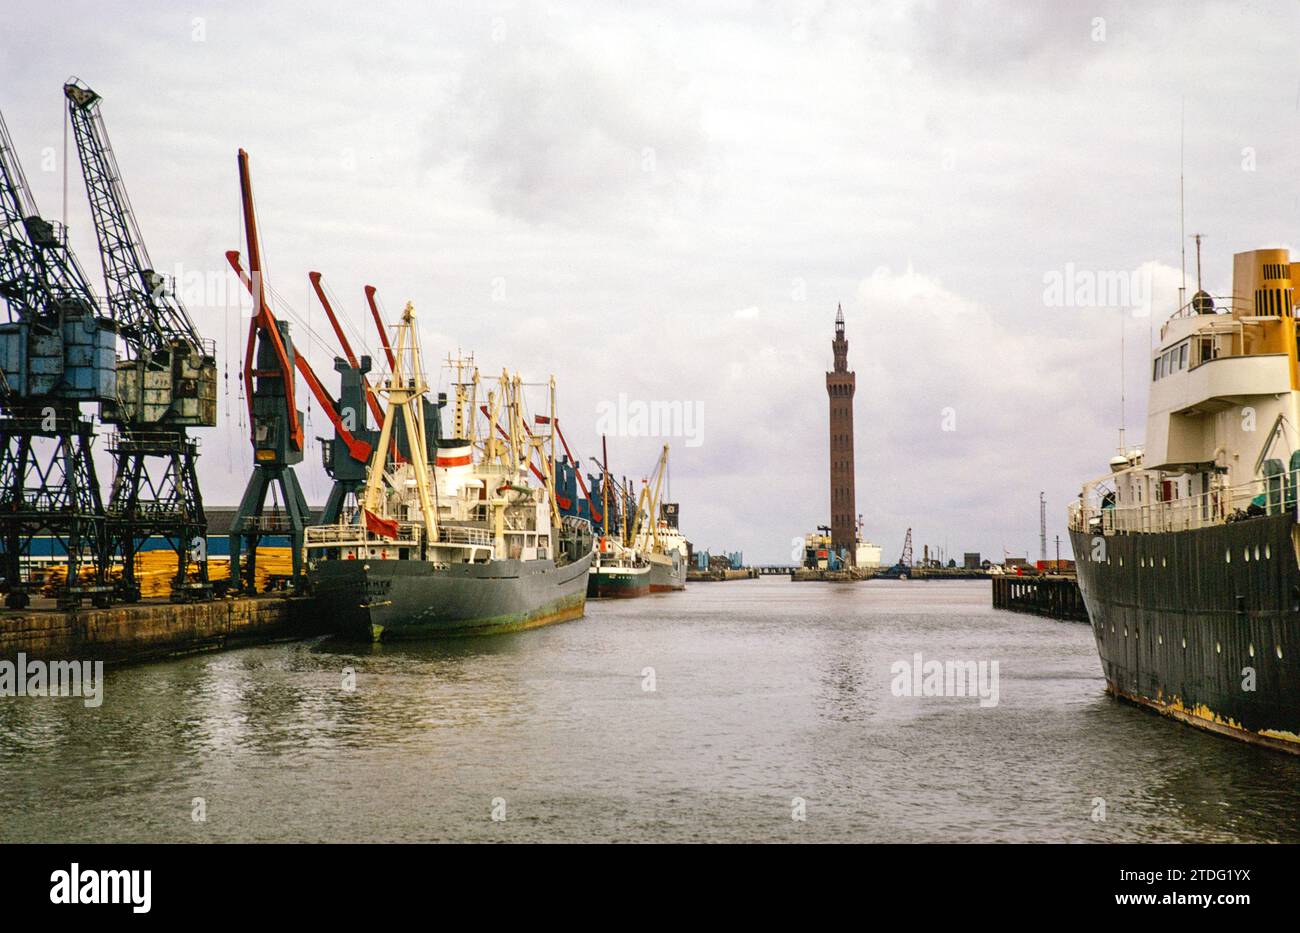 Cargo ships in Royal Dock with Grimsby Dock Tower, Grimsby, Lincolnshire, England, UK September 1973 Stock Photo